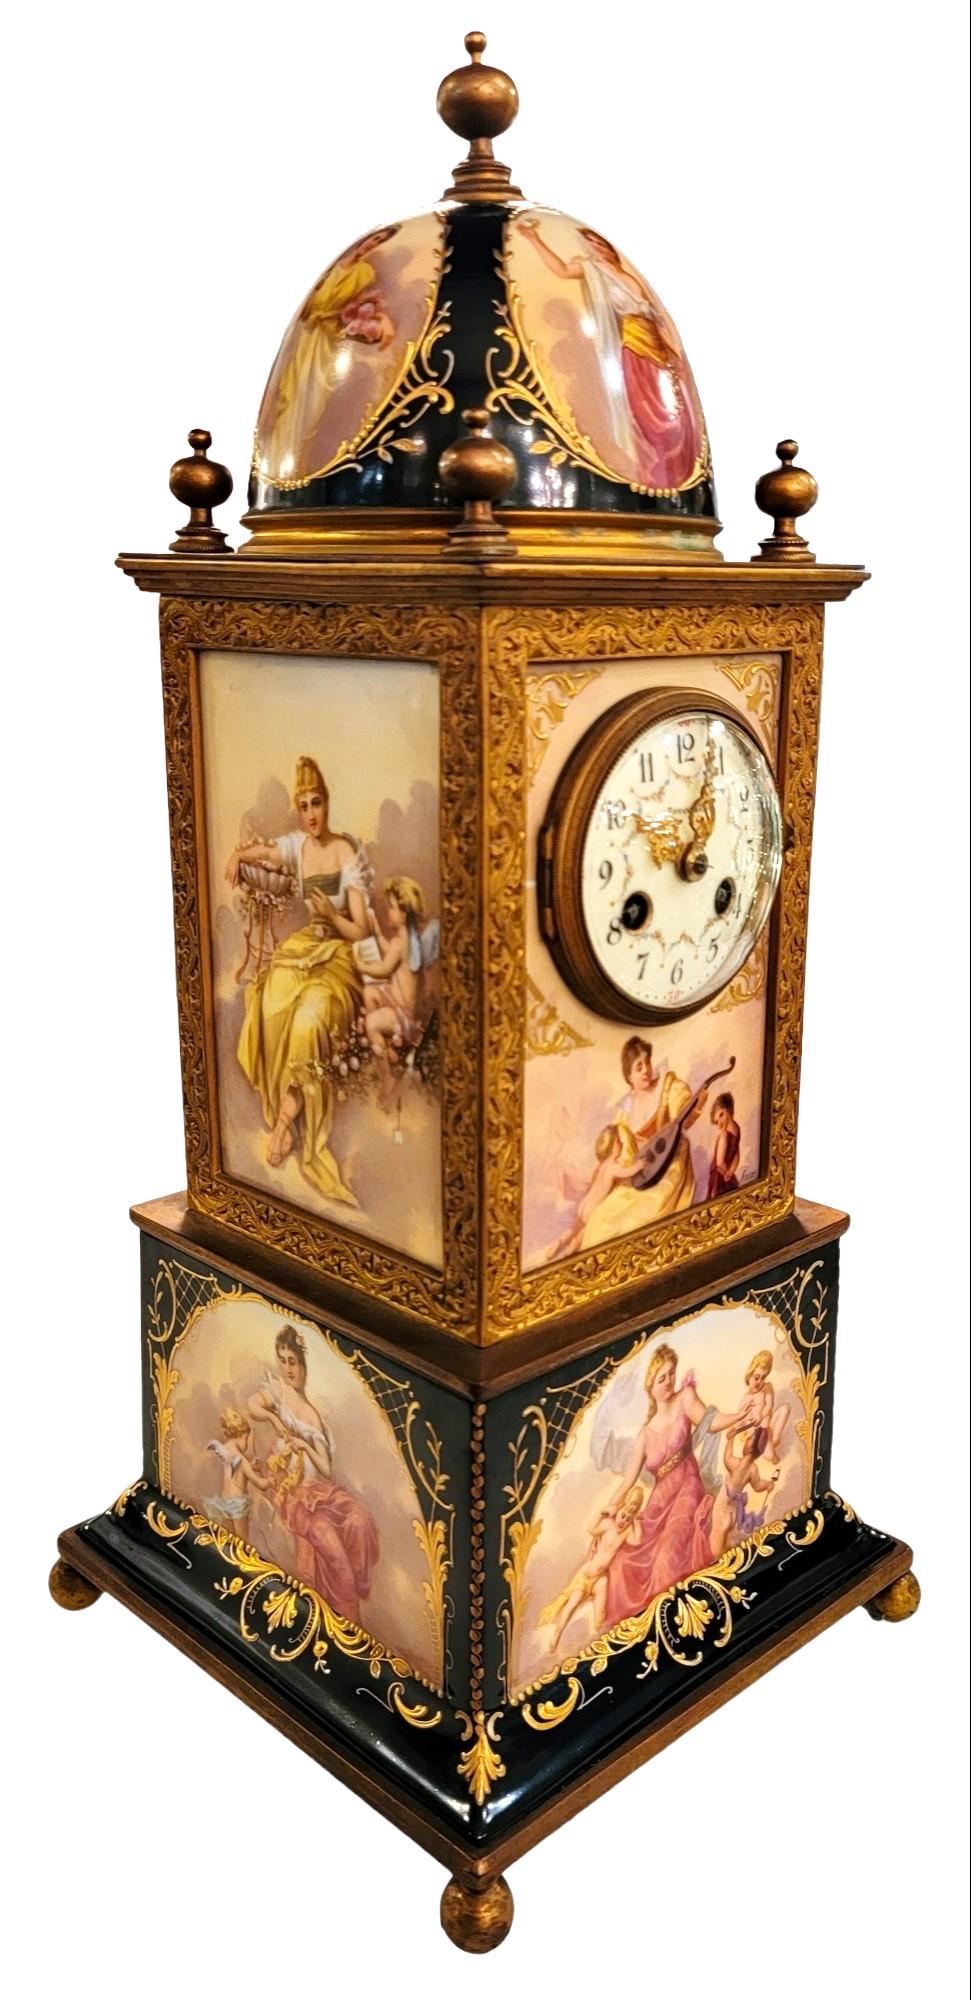 Rare Tiffany and Company French Sevres Mantle Clock. Beautiful hand painted Color with museum like quality throughout the entire clock. The interior is currently on and in working order. Measures approx 7.75w x 7.75d x 17.5h
